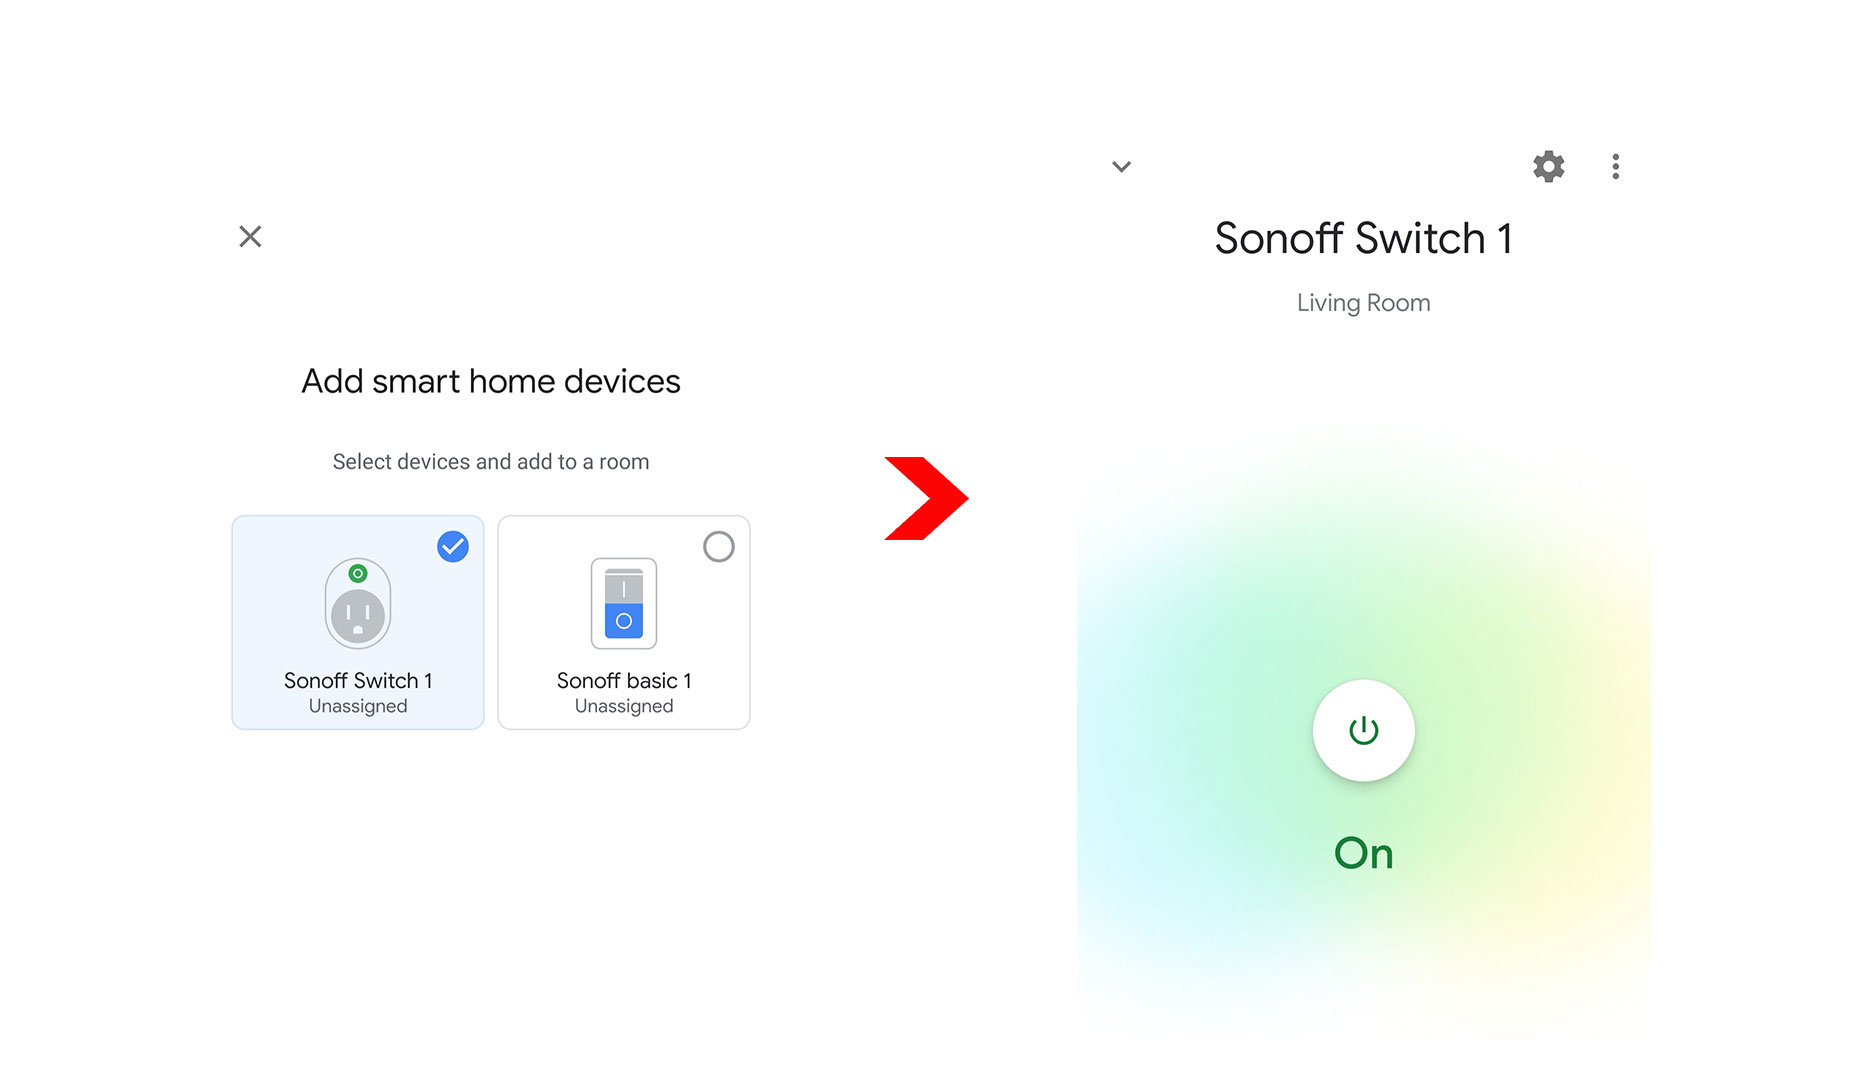 Now you can control the light through your Home app